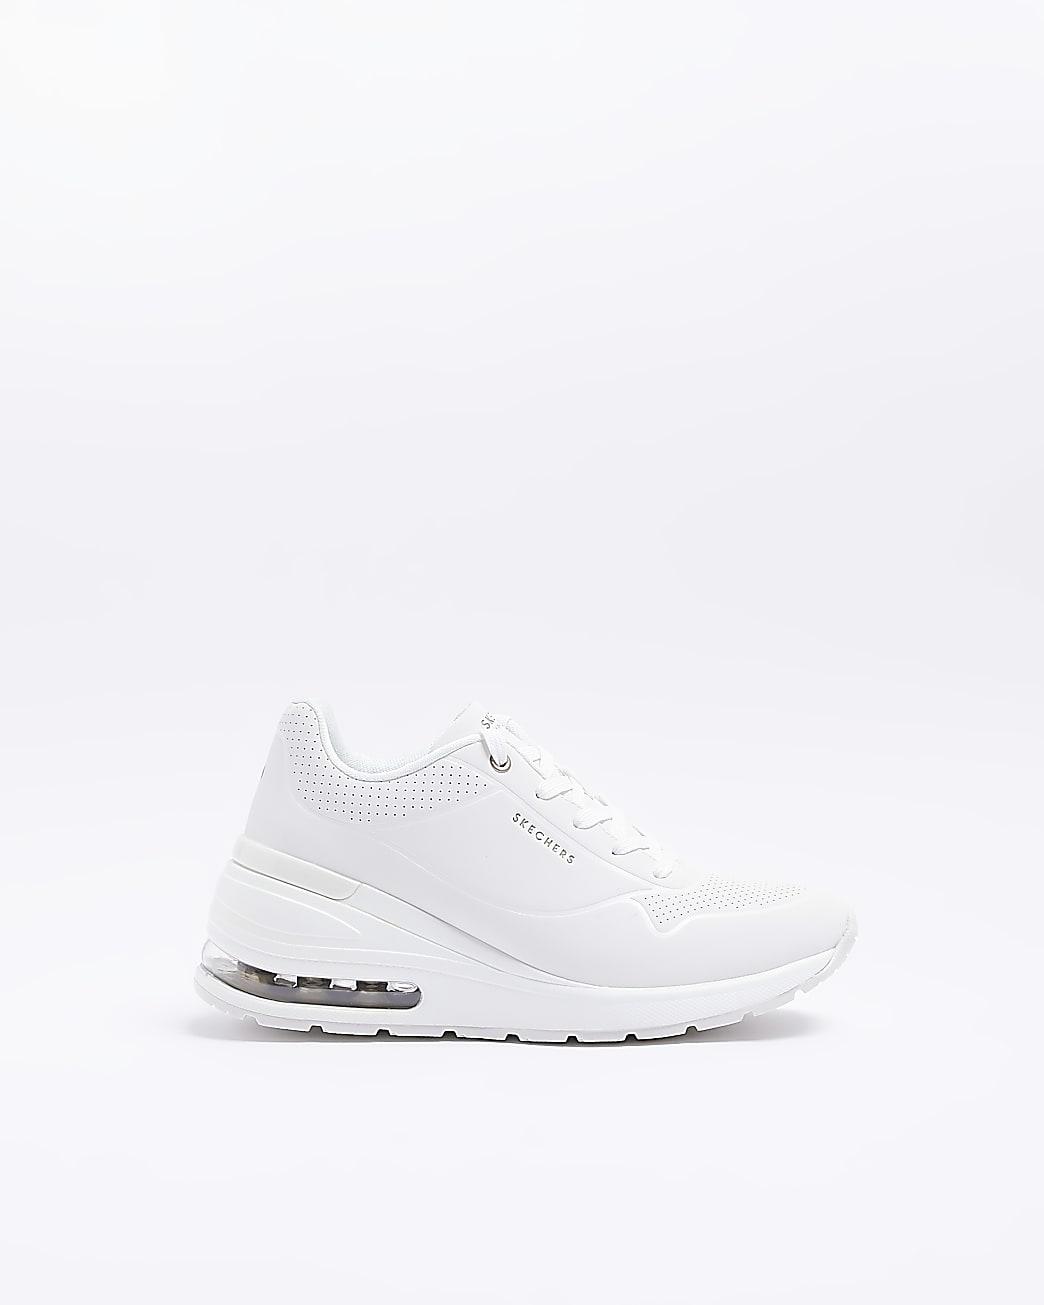 Skechers River Island Million Air Elevated Trainers in White | Lyst